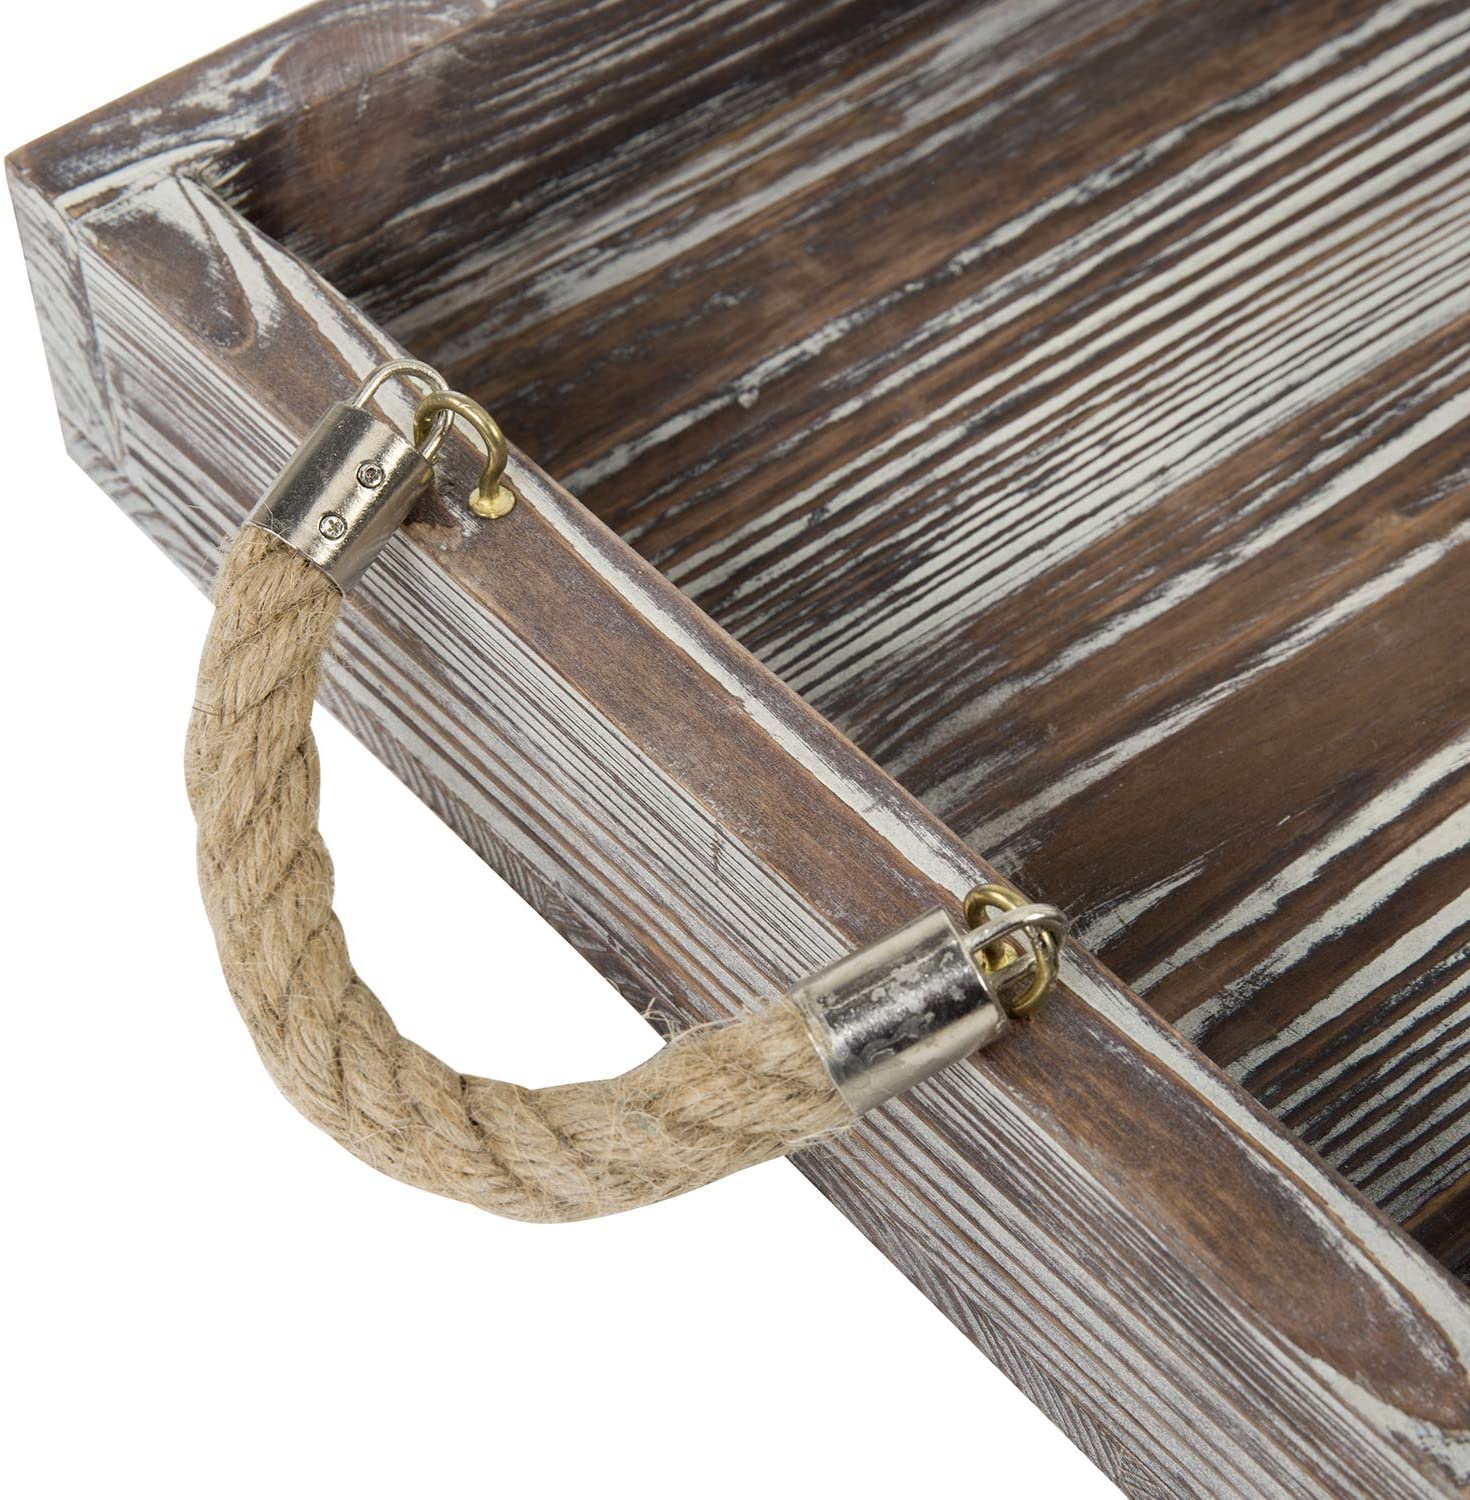 Rustic Wood Rectangular Nesting Serving Trays with Twisted Rope Handles, Set of 2